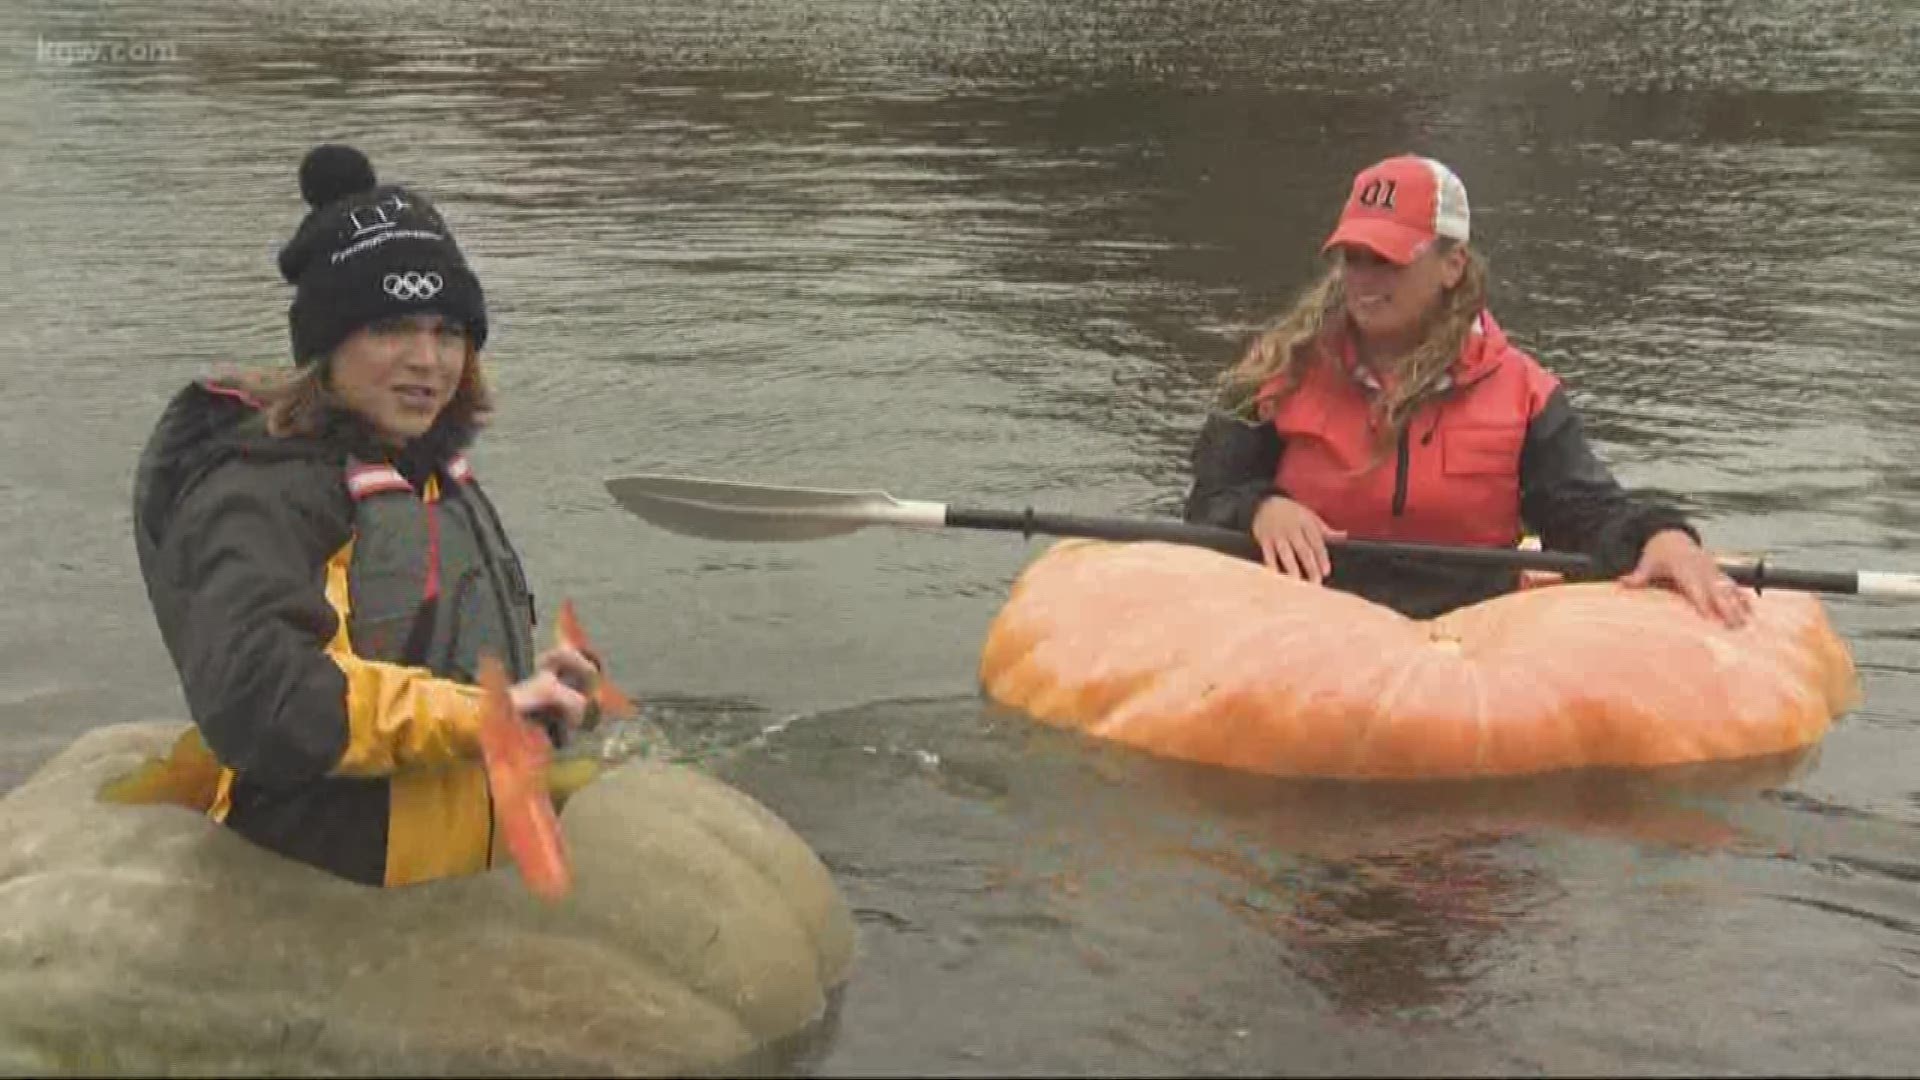 It's the 16th year of the West Coast Giant Pumpkin Regatta. So, Cassidy Quinn decided to try it out herself. The regatta starts at 10 a.m. on Saturday 10/19.